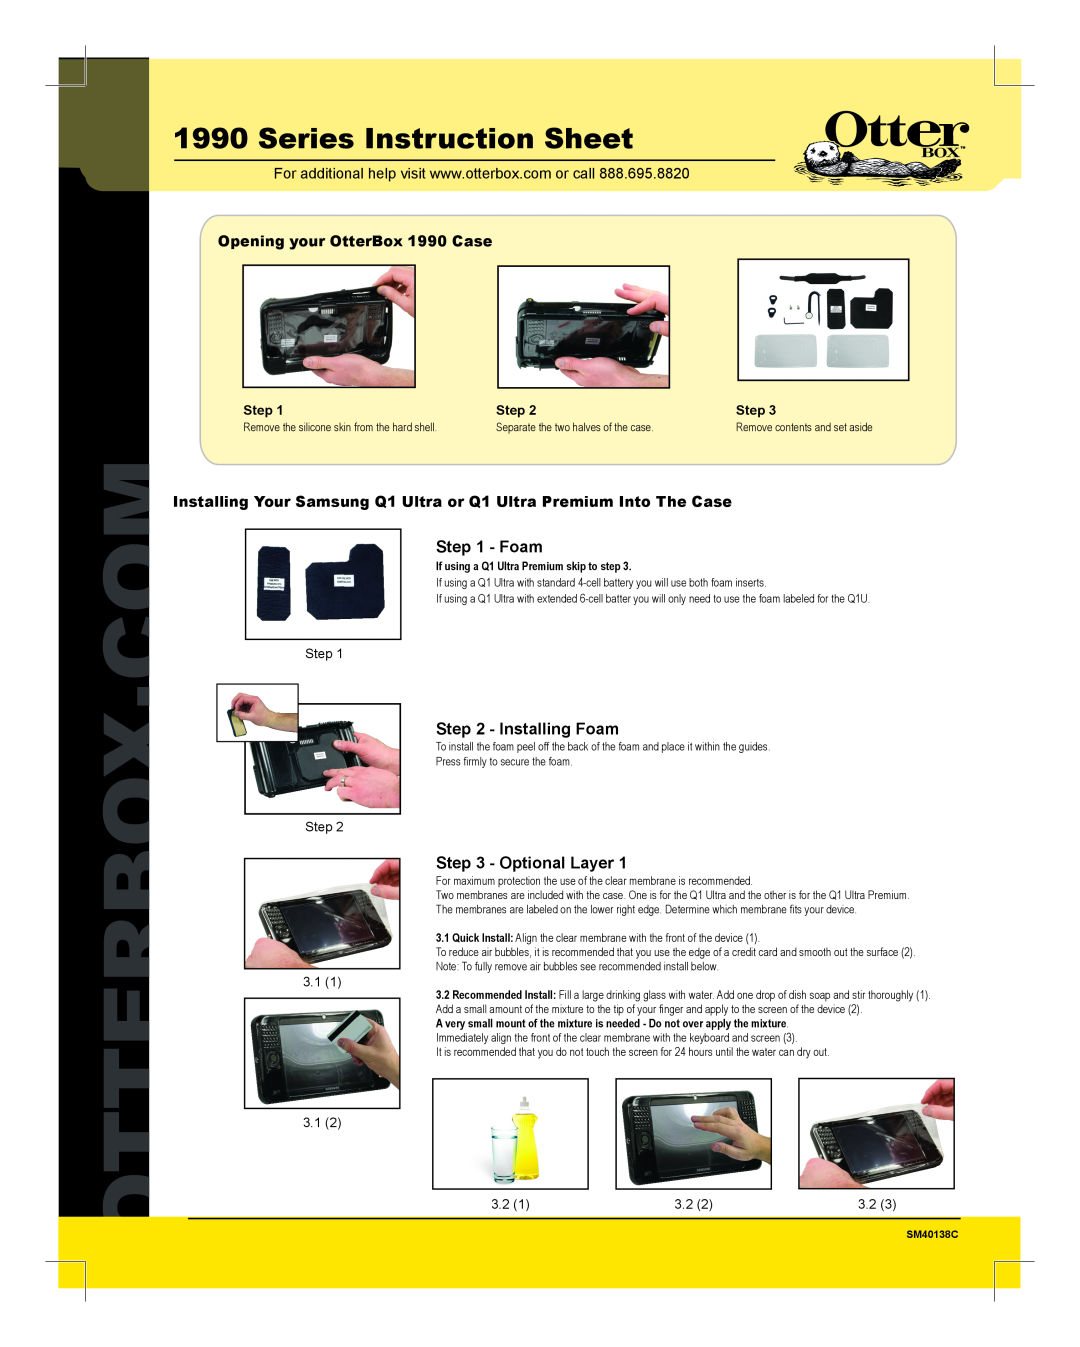 Otter Products q1 manual Series Instruction Sheet, Installing Foam, Optional Layer, Step, 3.1 3.1, Otterbox 